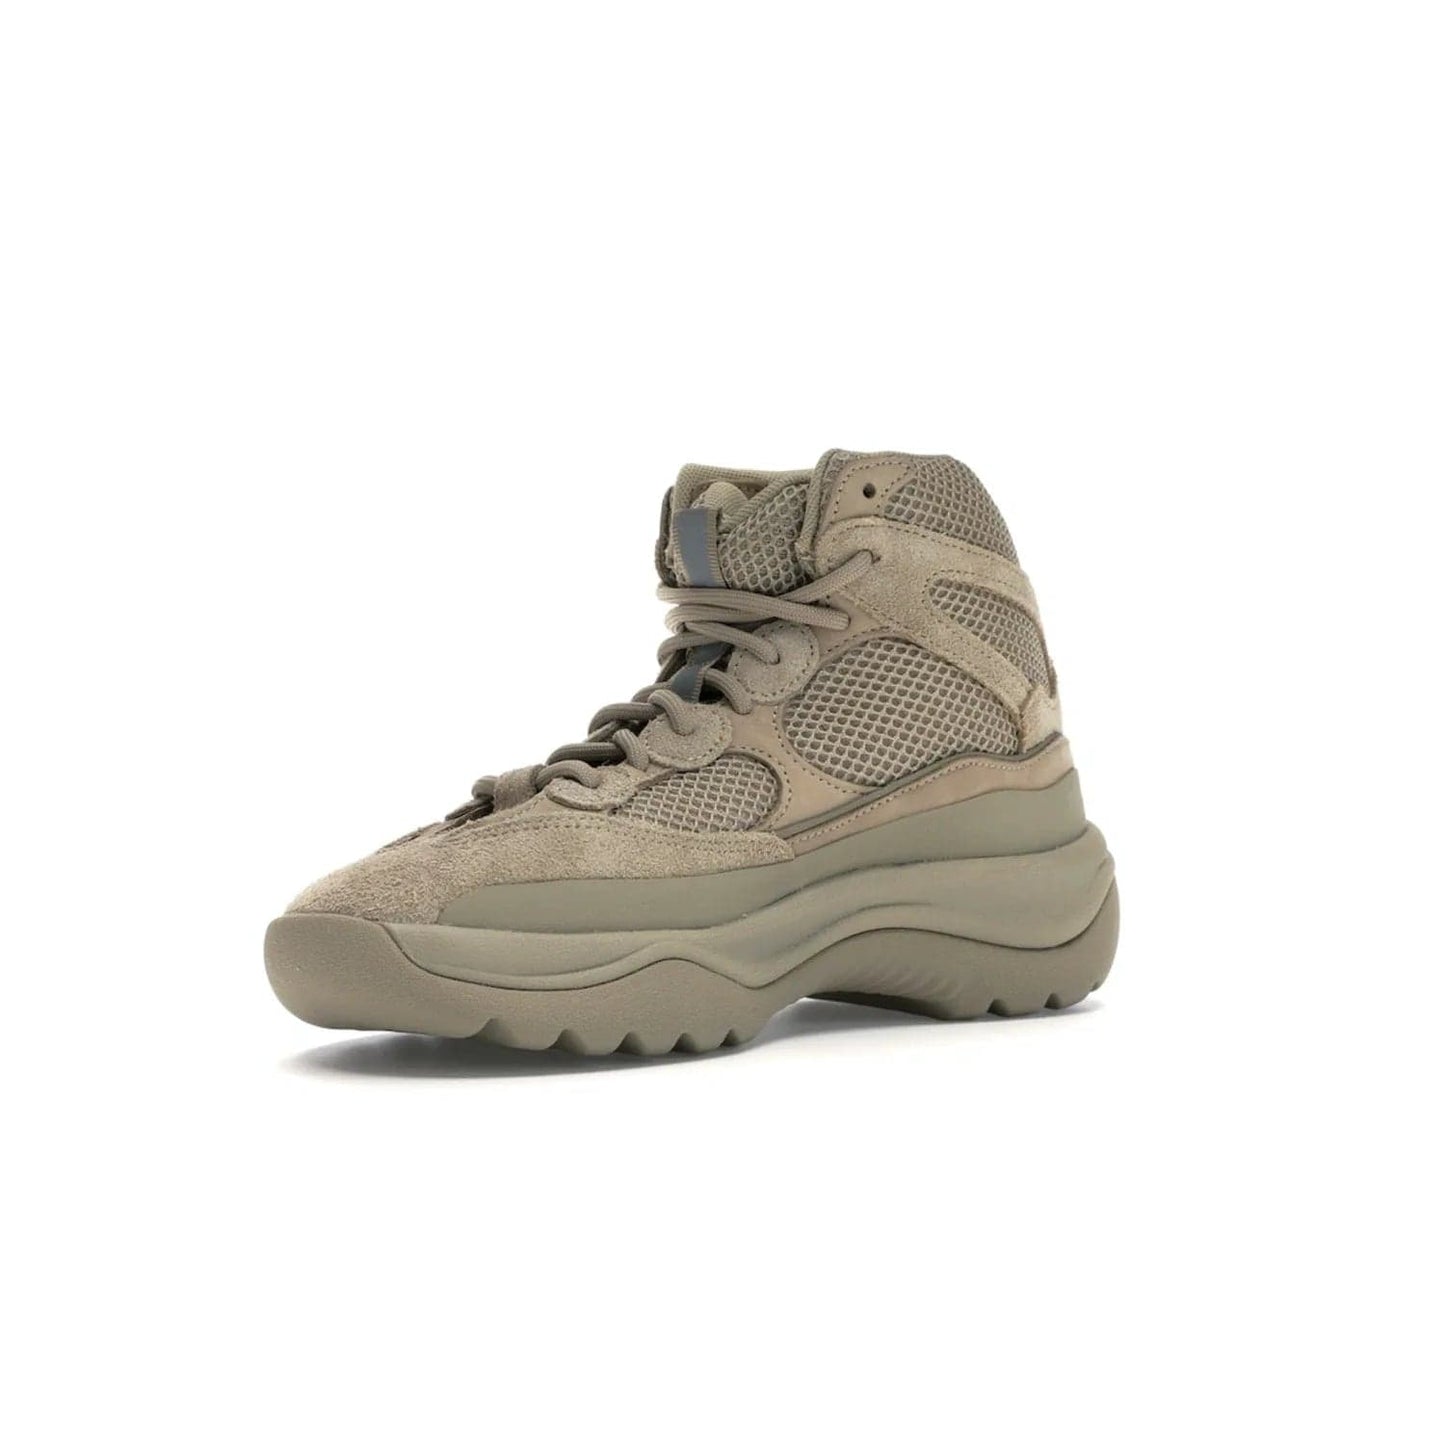 adidas Yeezy Desert Boot Rock - Image 15 - Only at www.BallersClubKickz.com - #
This season, make a fashion statement with the adidas Yeezy Desert Boot Rock. Nubuck and suede upper offers tonal style while the grooved sole provides traction and stability. Get yours in April 2019.